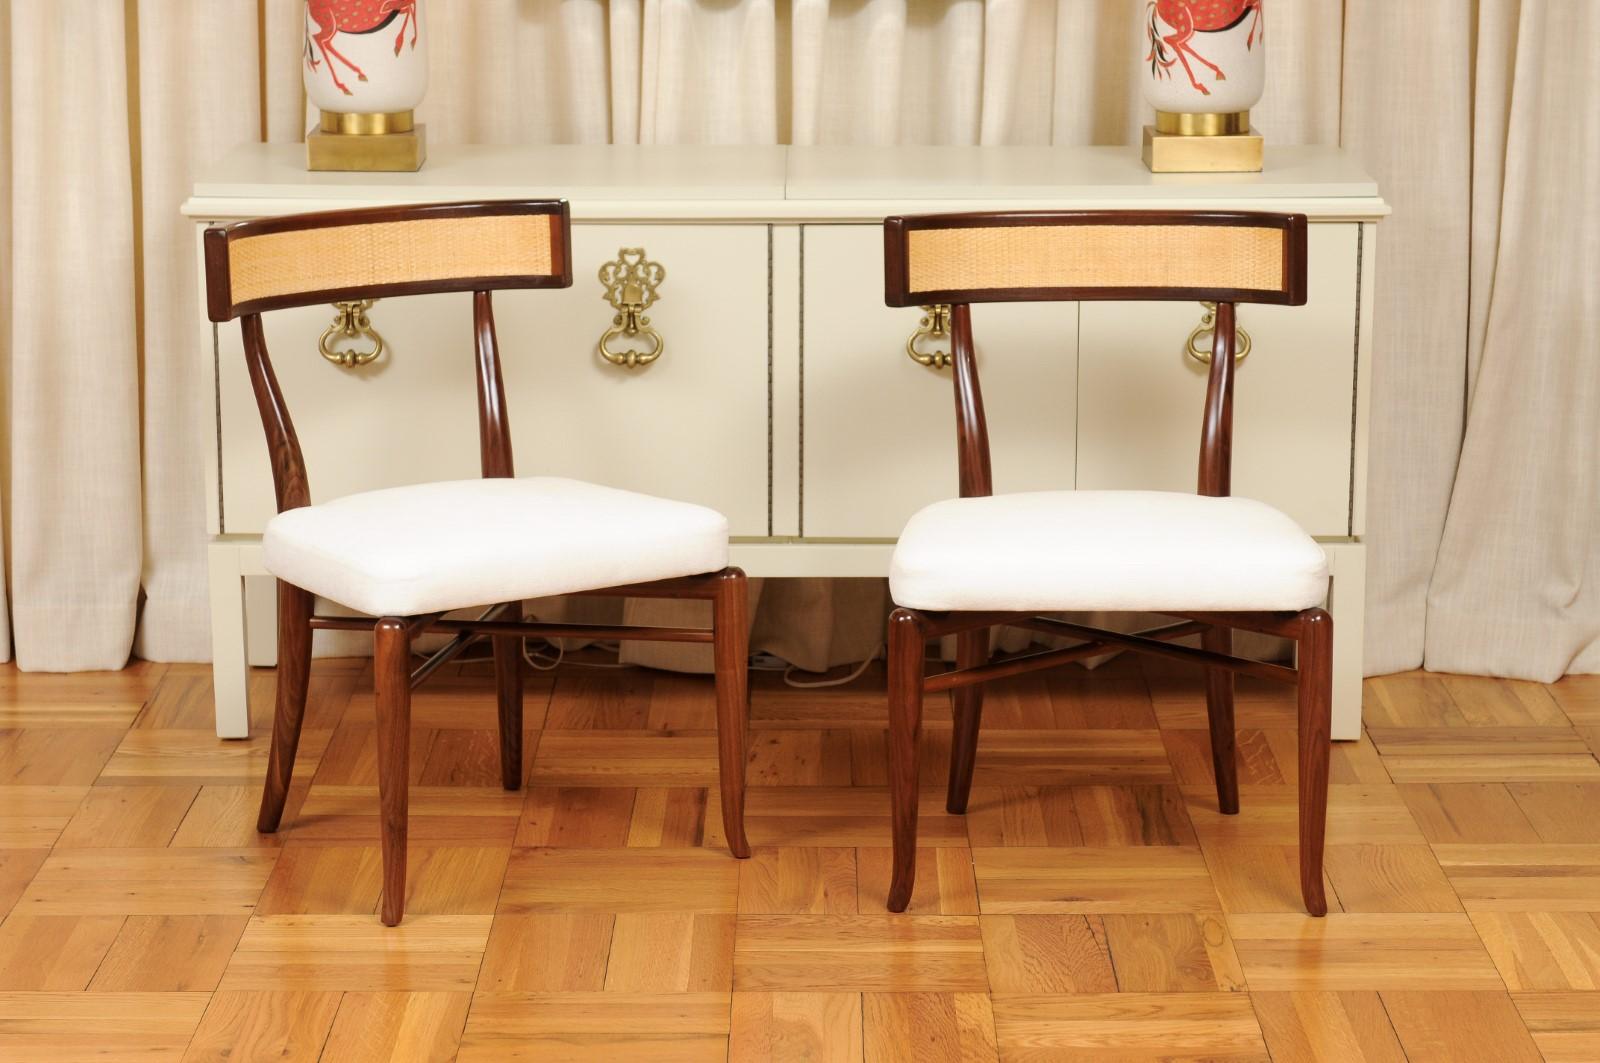 This magnificent set of dining chairs is shipped as professionally photographed and described in the listing narrative: Meticulously professionally restored, newly upholstered and completely installation ready. The New custom cane back is a